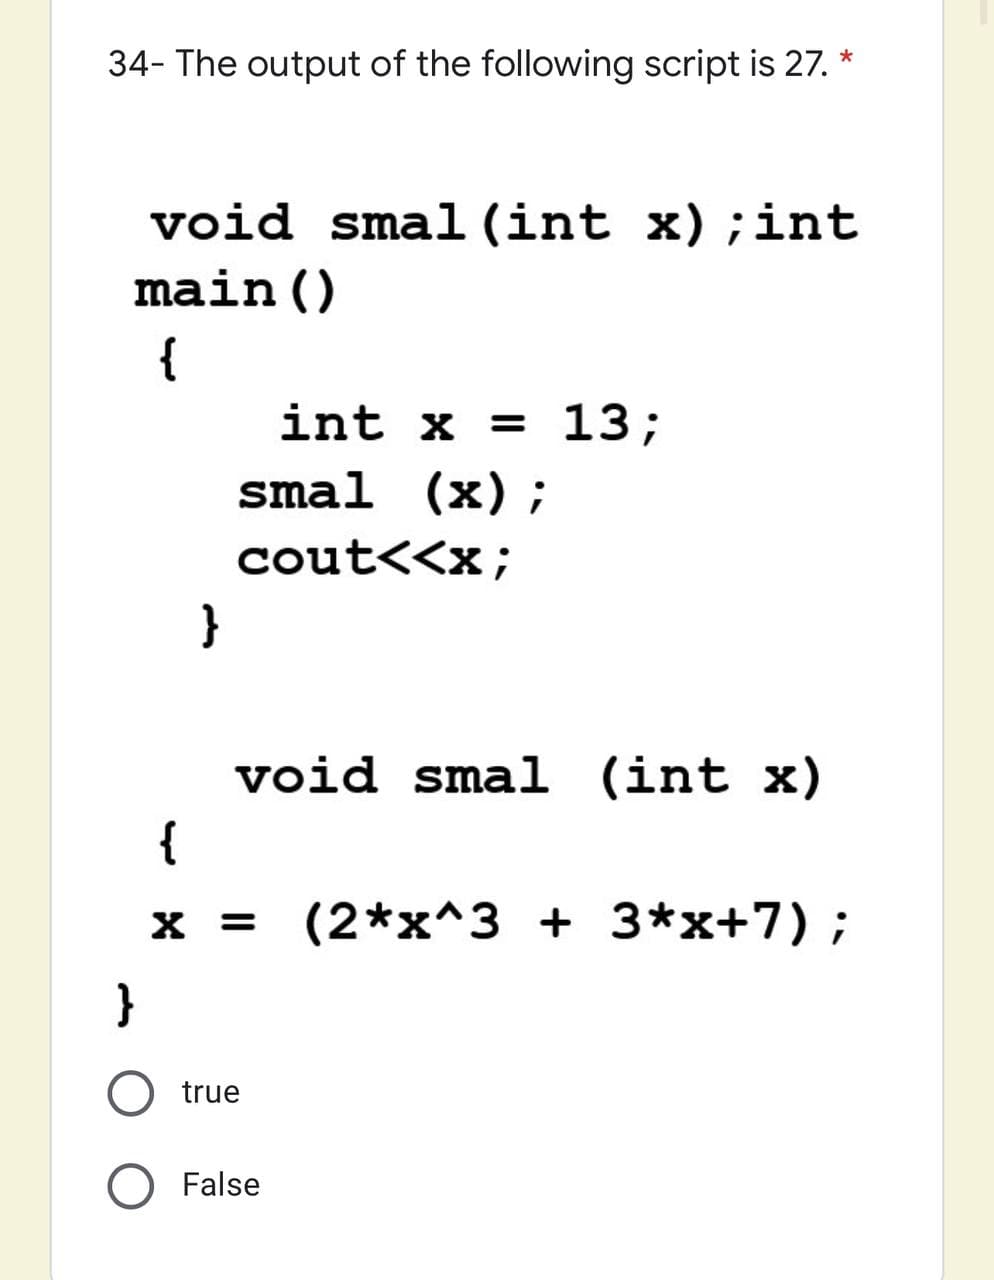 34- The output of the following script is 27. *
void smal (int x);int
main()
{
int x = 13;
smal (x);
cout<<x;
}
void smal (int x)
{
X =
= (2*x^3 + 3*x+7) ;
}
O true
O False
